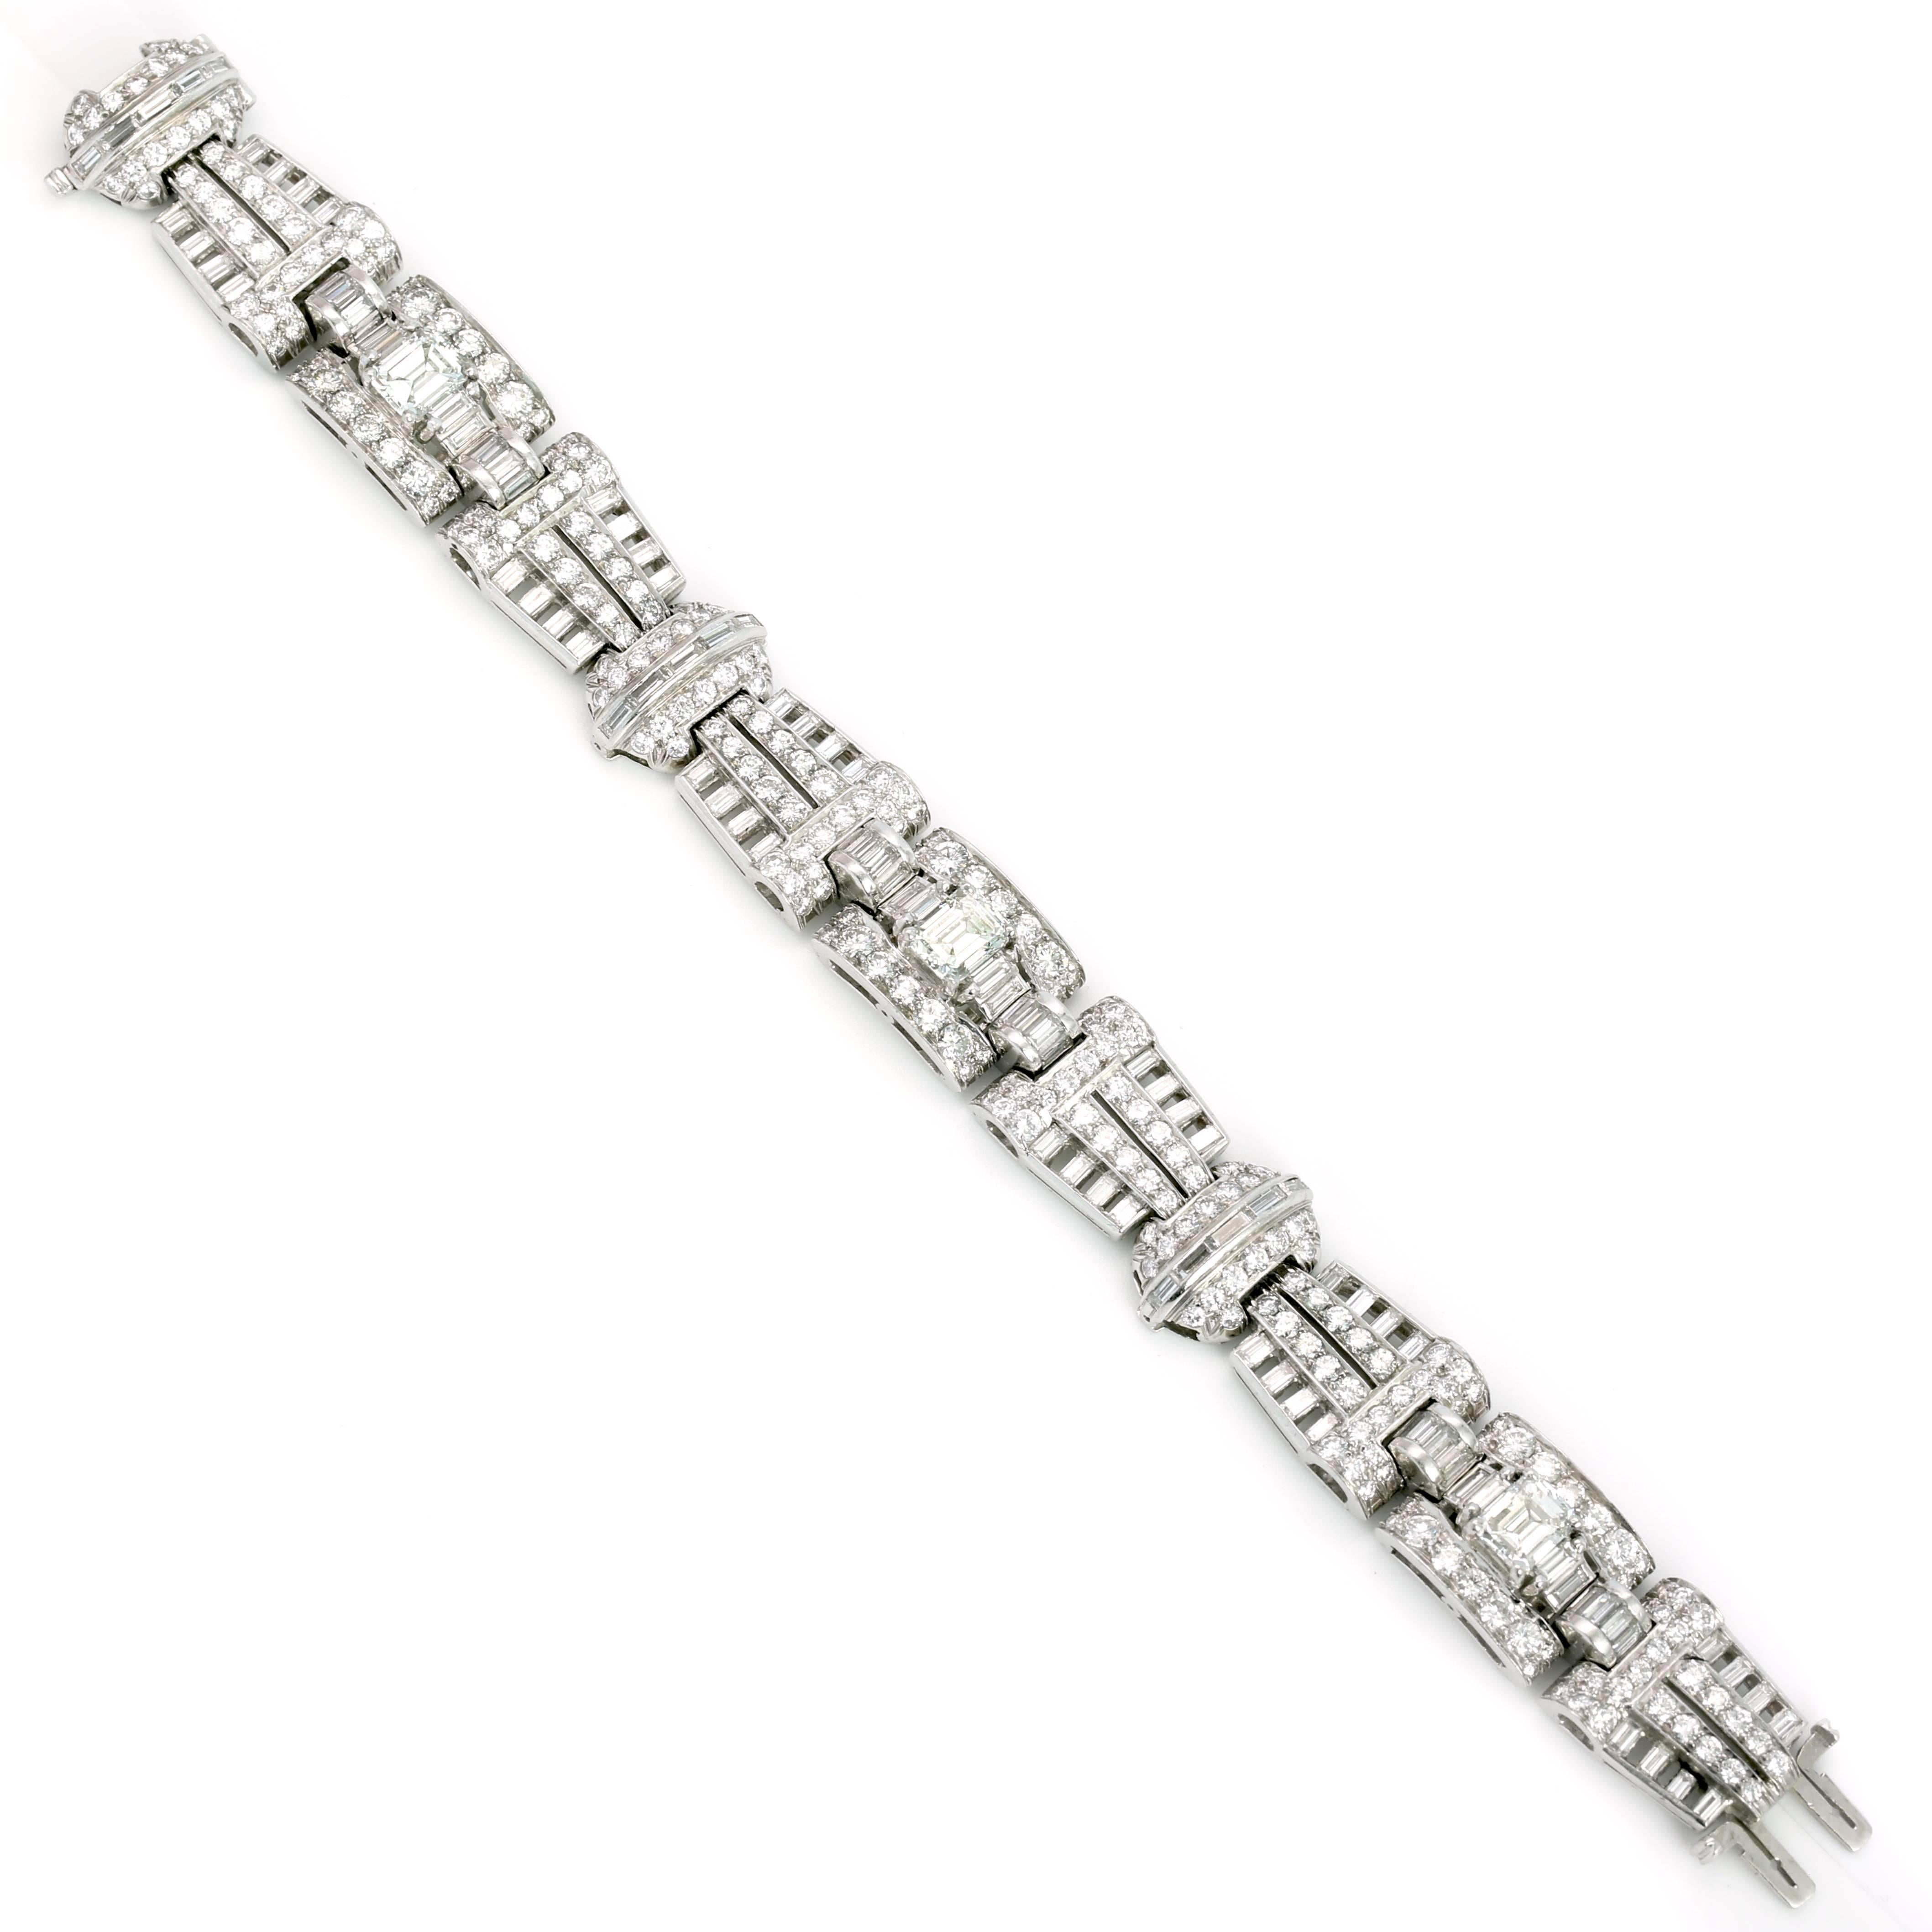 This Absolutely Stunning Deco Bracelet has 3 Emerald Cut Diamonds Weighing 4.20 Carats and 21.00 Carats of Diamonds on the Platinum Mounting.